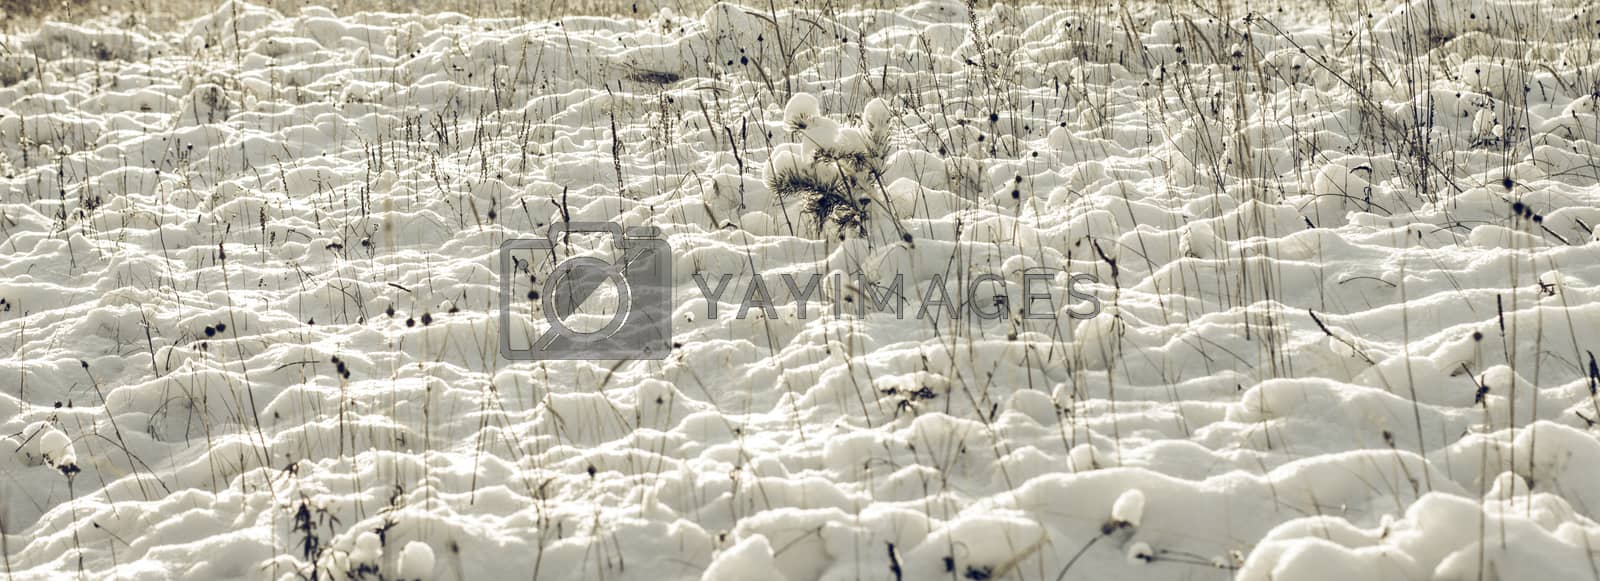 Royalty free image of White Wintry Wonderland by Supertooper